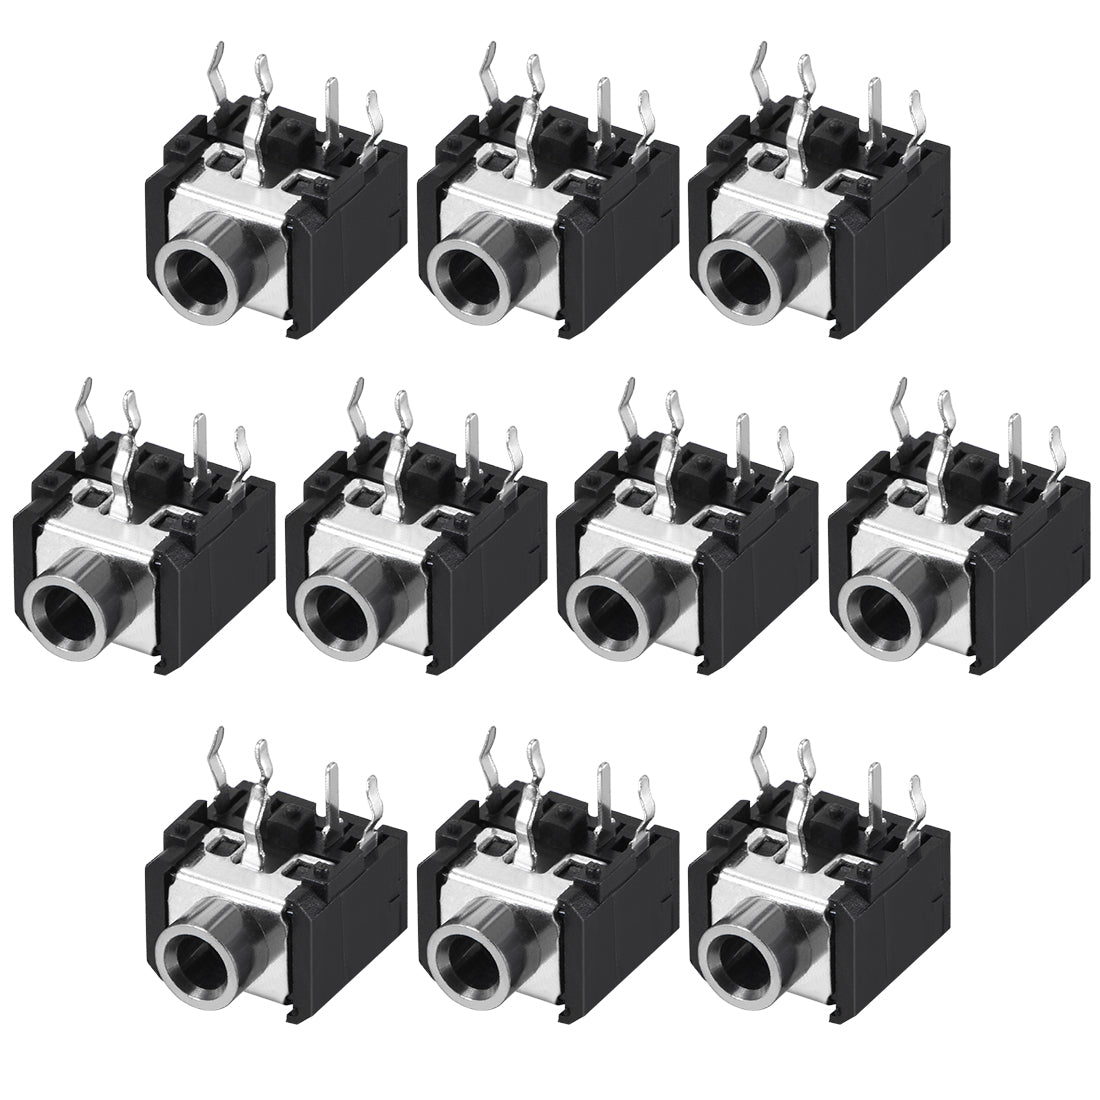 uxcell Uxcell PCB Mount 3.5mm 5 Pin Socket Headphone Stereo Jack Audio Video Connector PJ306 Black 10Pcs